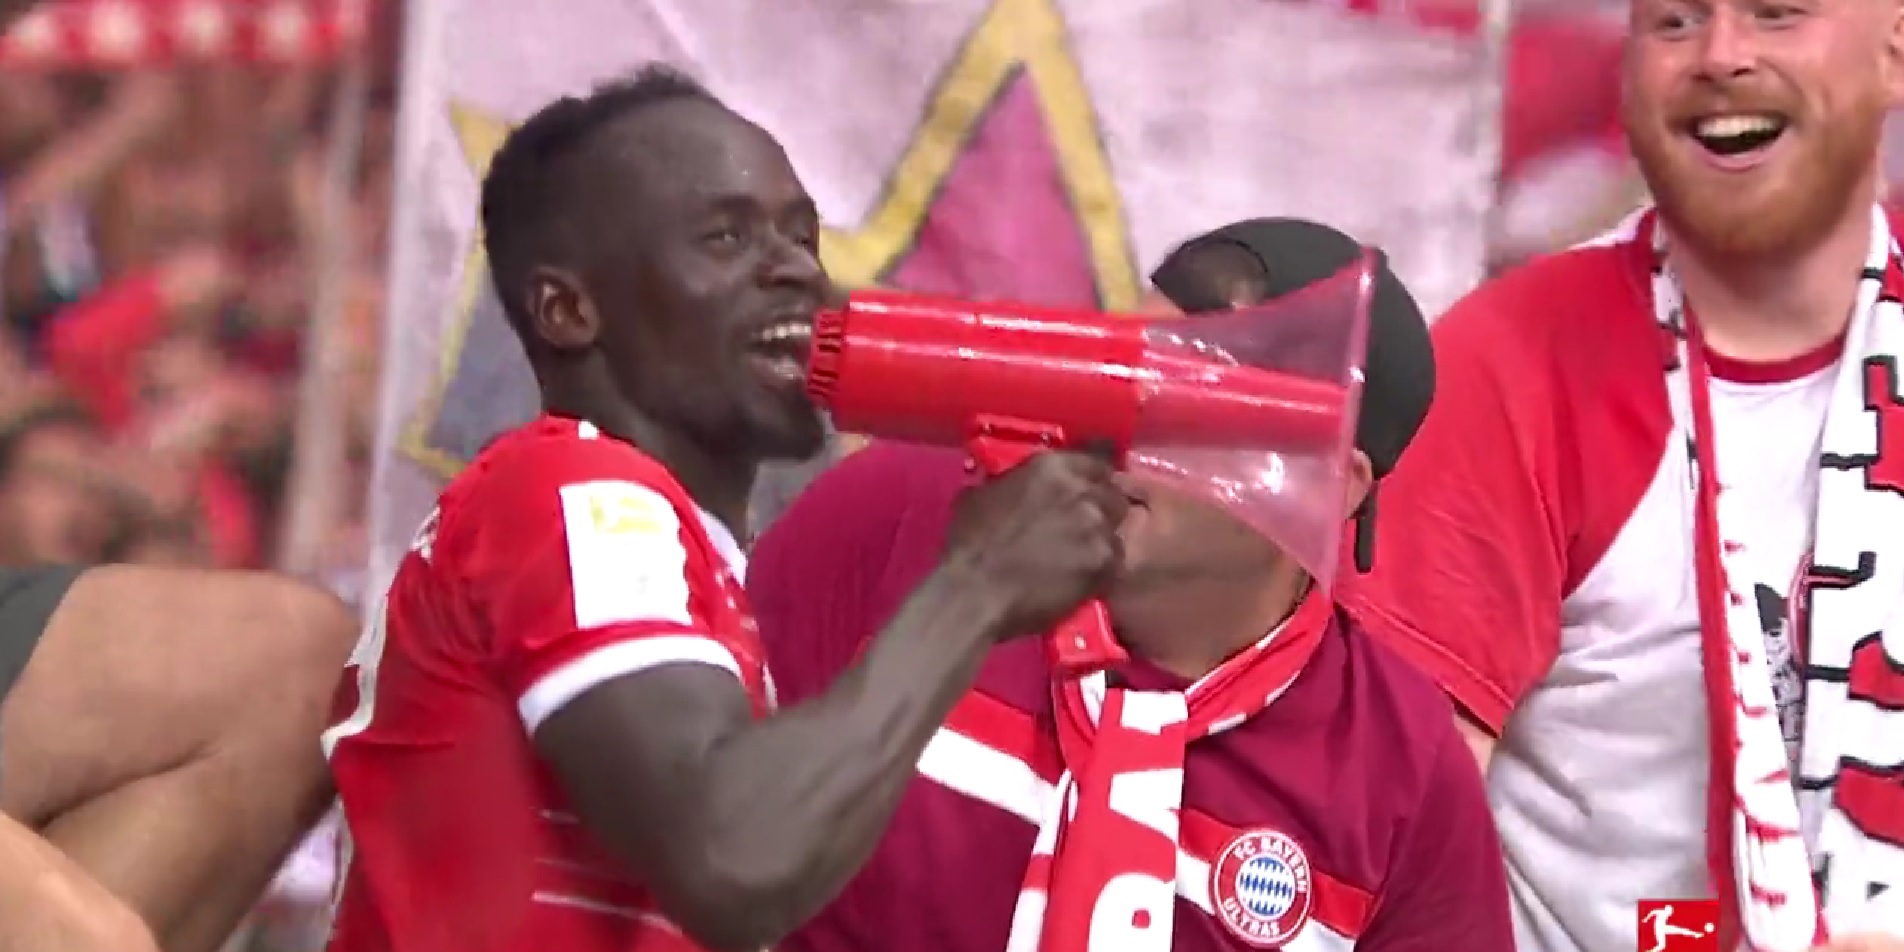 (Video) Wild scenes as megaphone-wielding Sadio Mane joins fans in stands after Bayern win